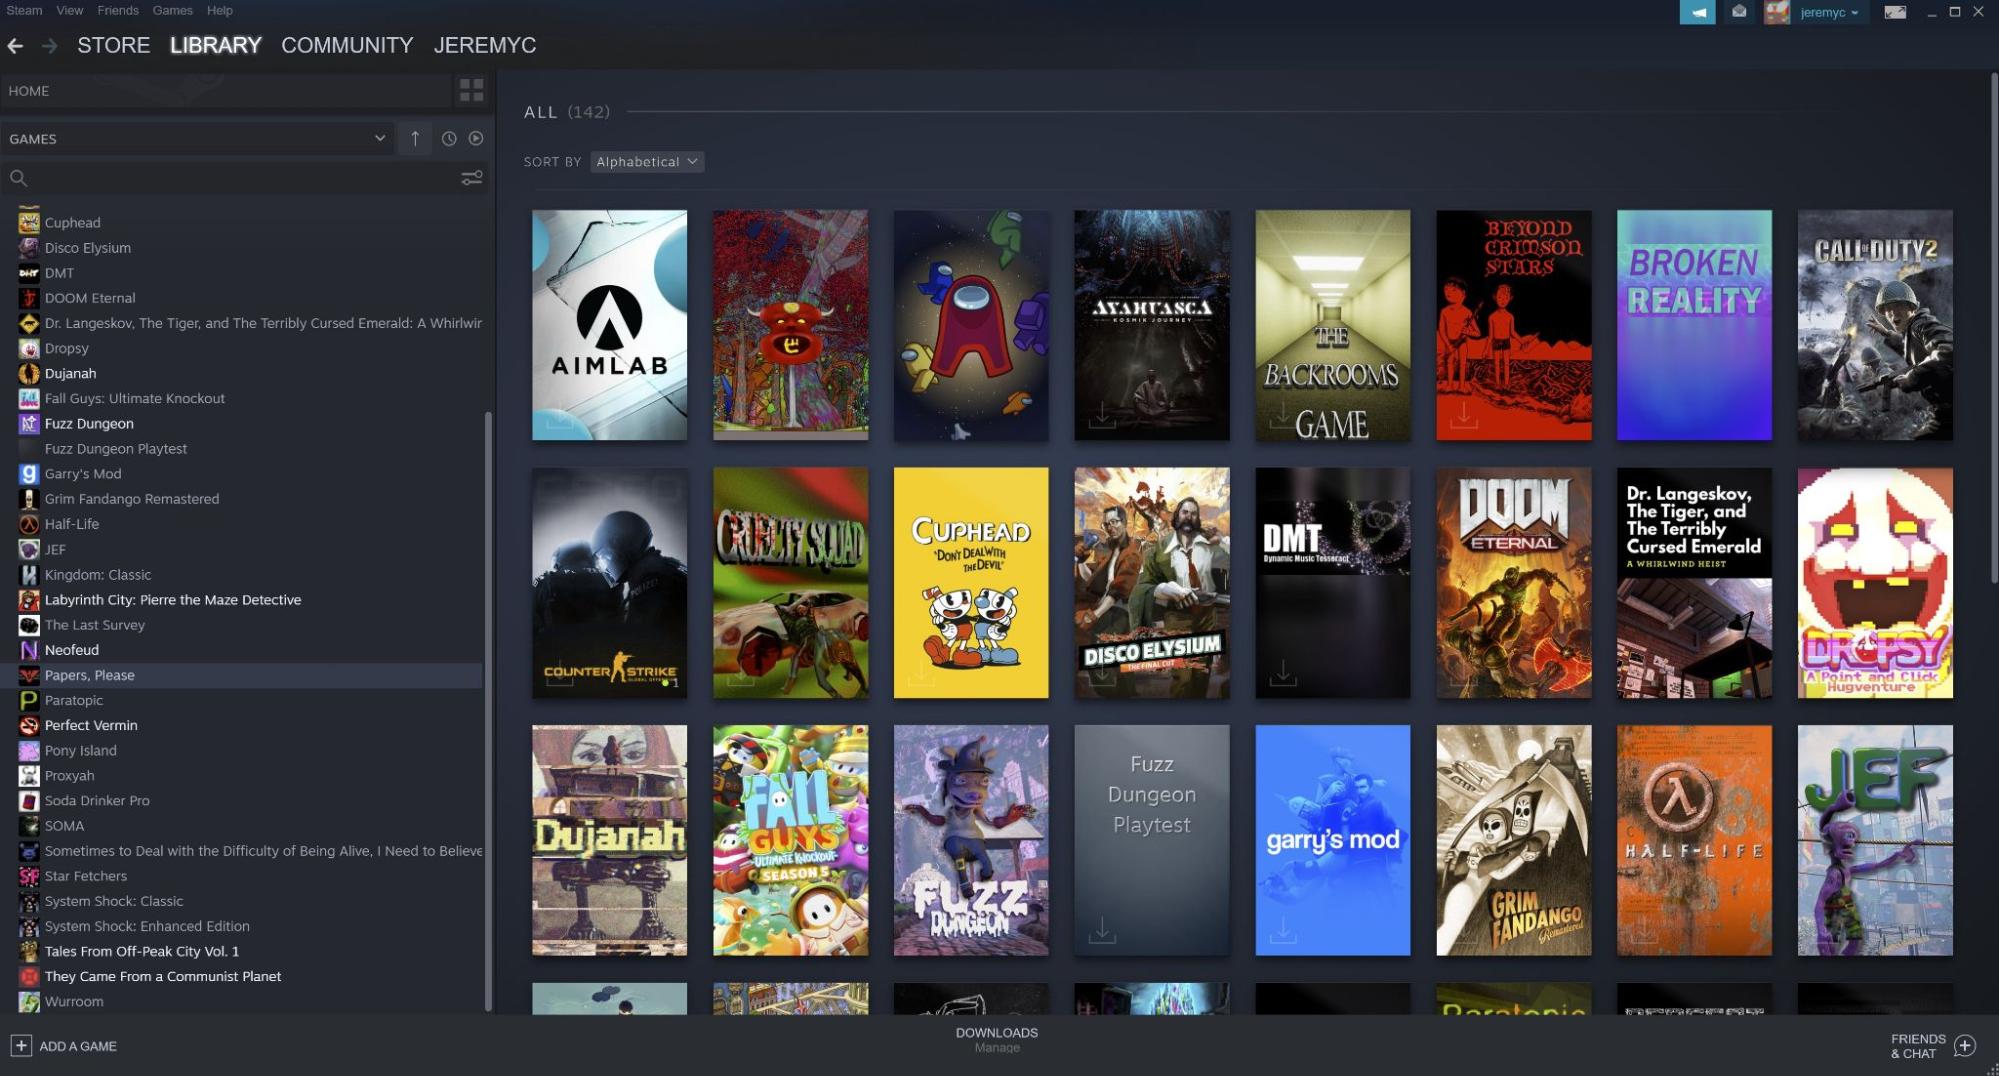 Image of Jeremy's moderate Steam collection. Includes Doom 2016 and Among Us.